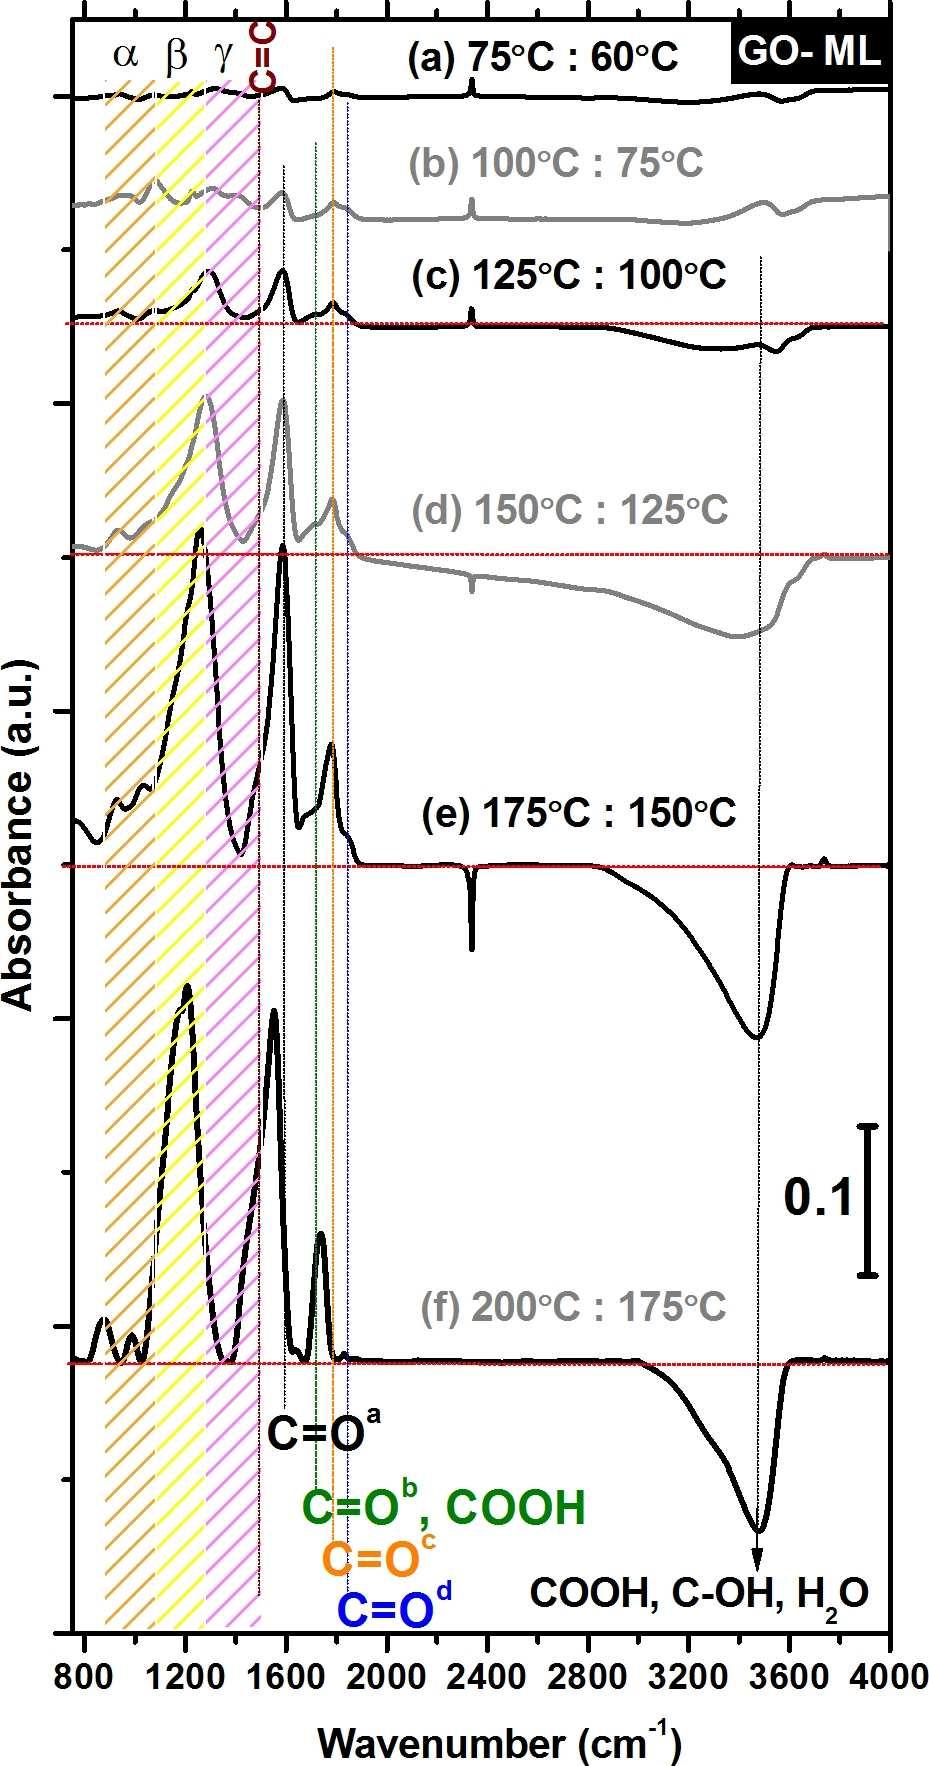 Figure S3 Differential infrared absorption spectra of multilayered G in transmission, i.e. referenced to the spectrum collected at the temperature indicated after the colon.